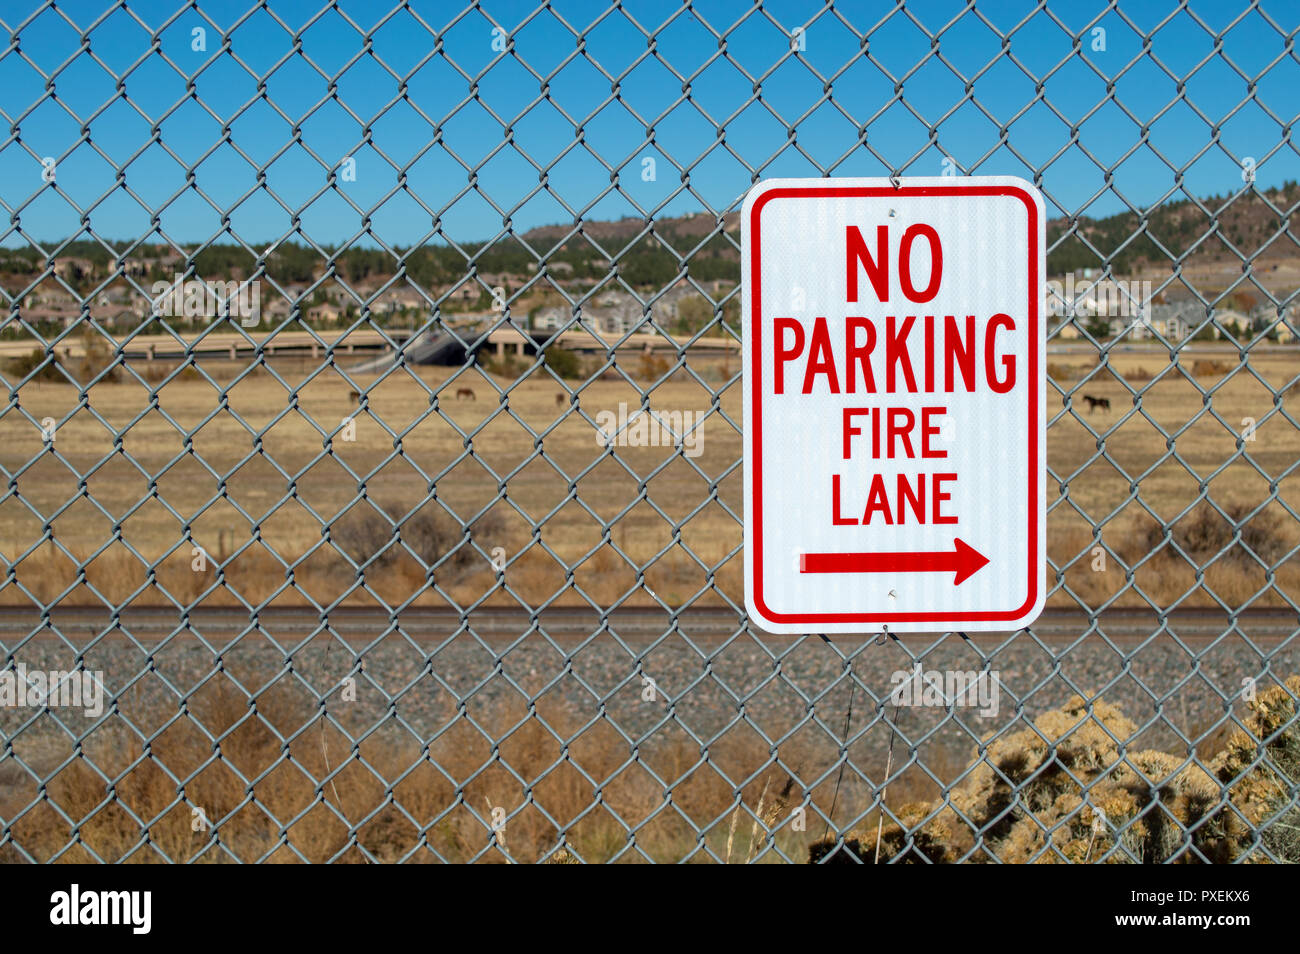 No parking fire lane sign on fence in parking lot Stock Photo